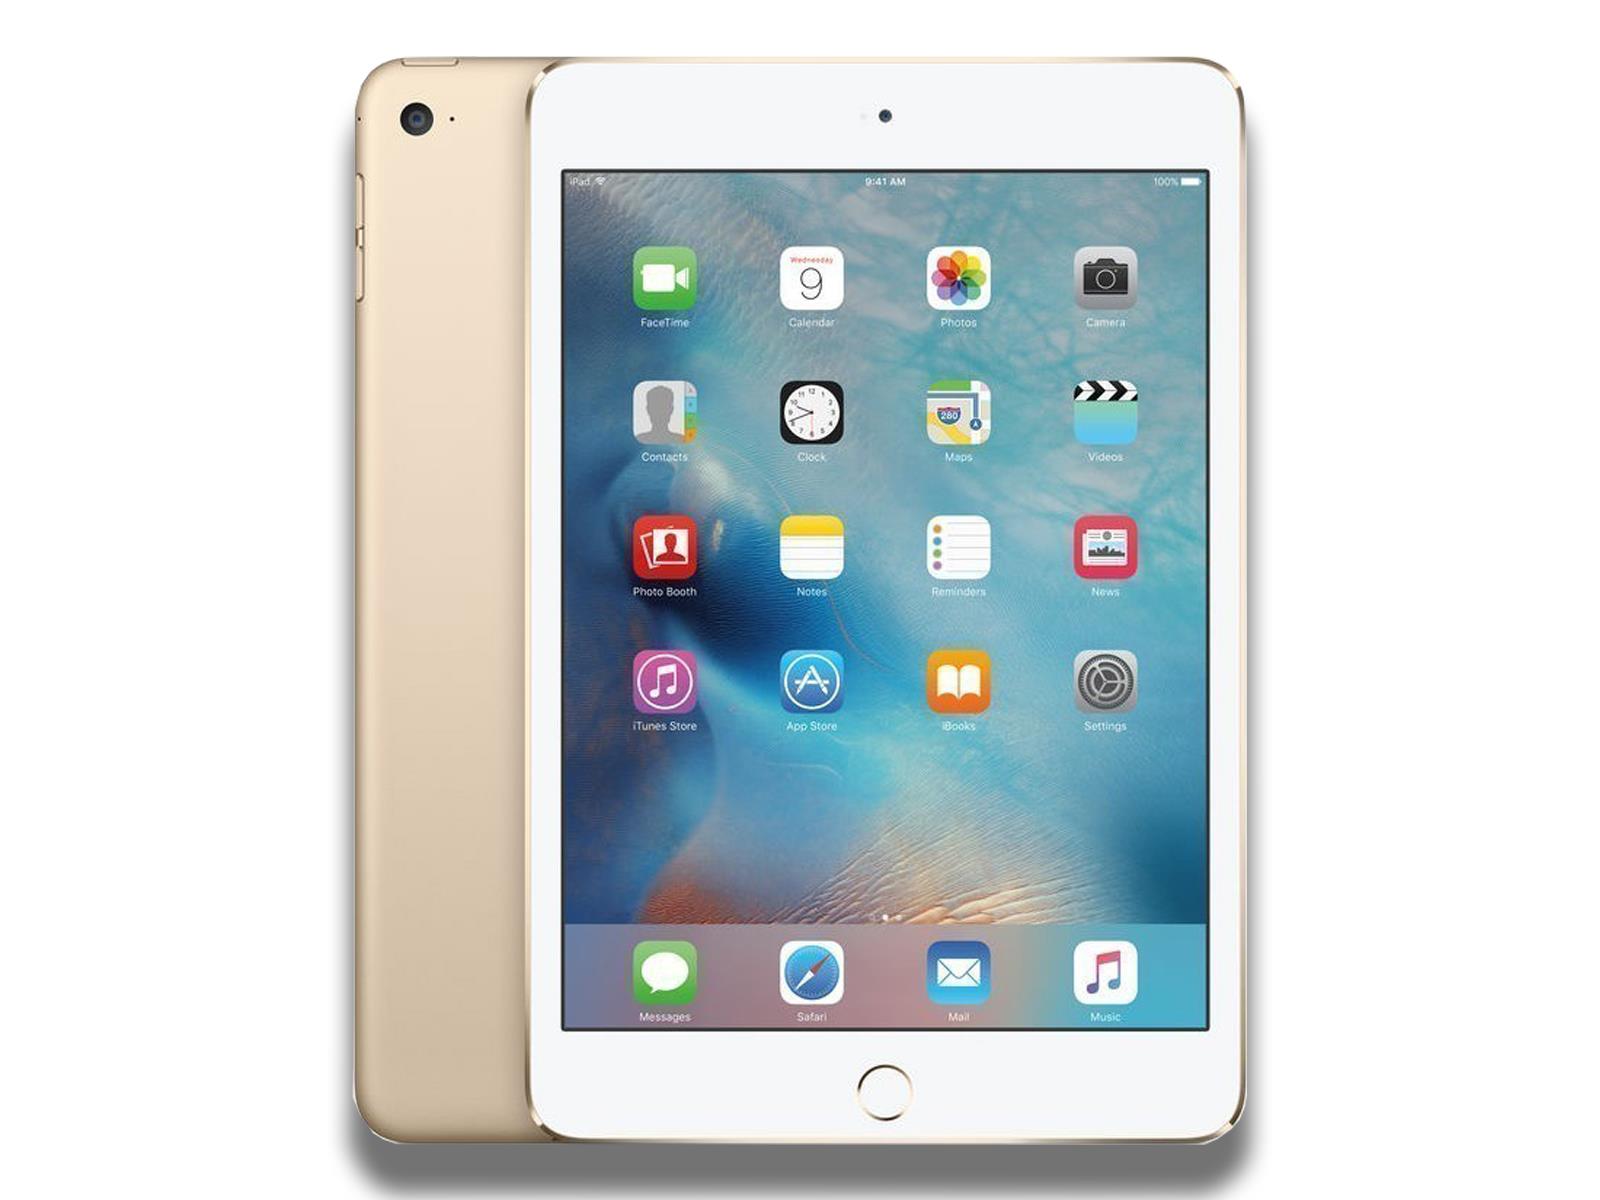 Image shows a front and rear view of the Gold Apple iPad Mini 4th Generation